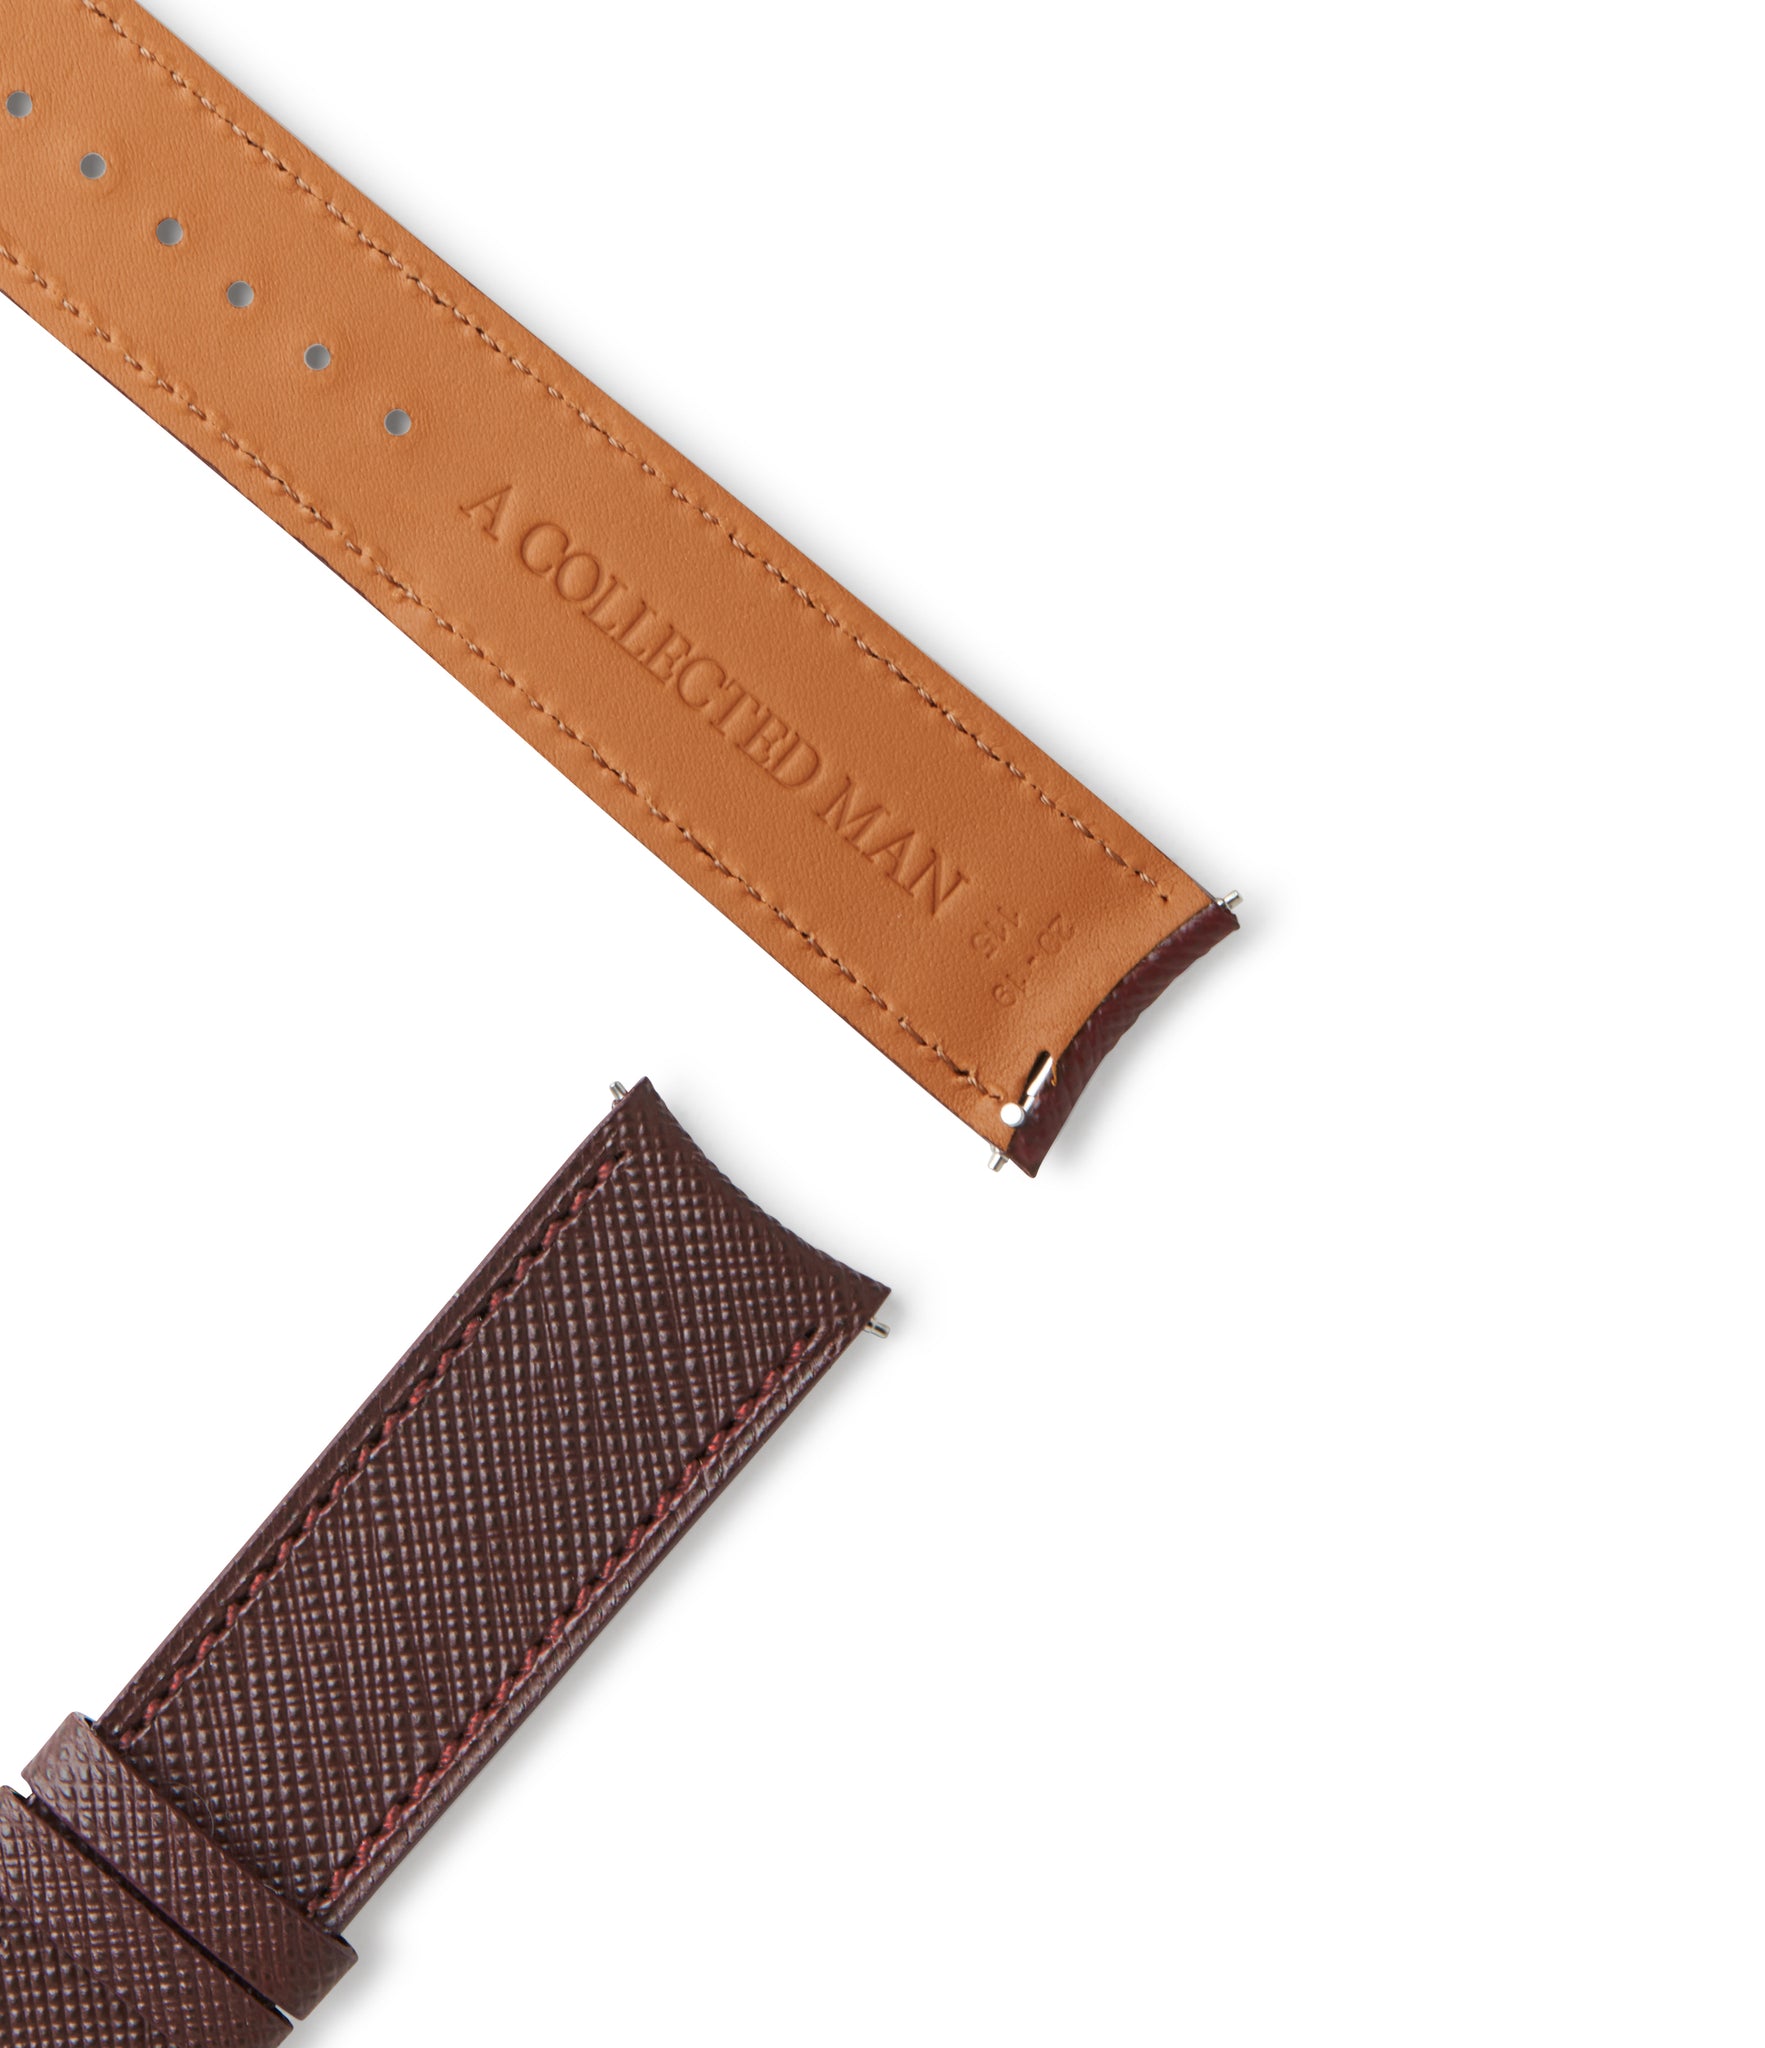 Buy saffiano quality watch strap in dark maroon burgundy from A Collected Man London, in short or regular lengths. We are proud to offer these hand-crafted watch straps, thoughtfully made in Europe, to suit your watch. Available to order online for worldwide delivery.